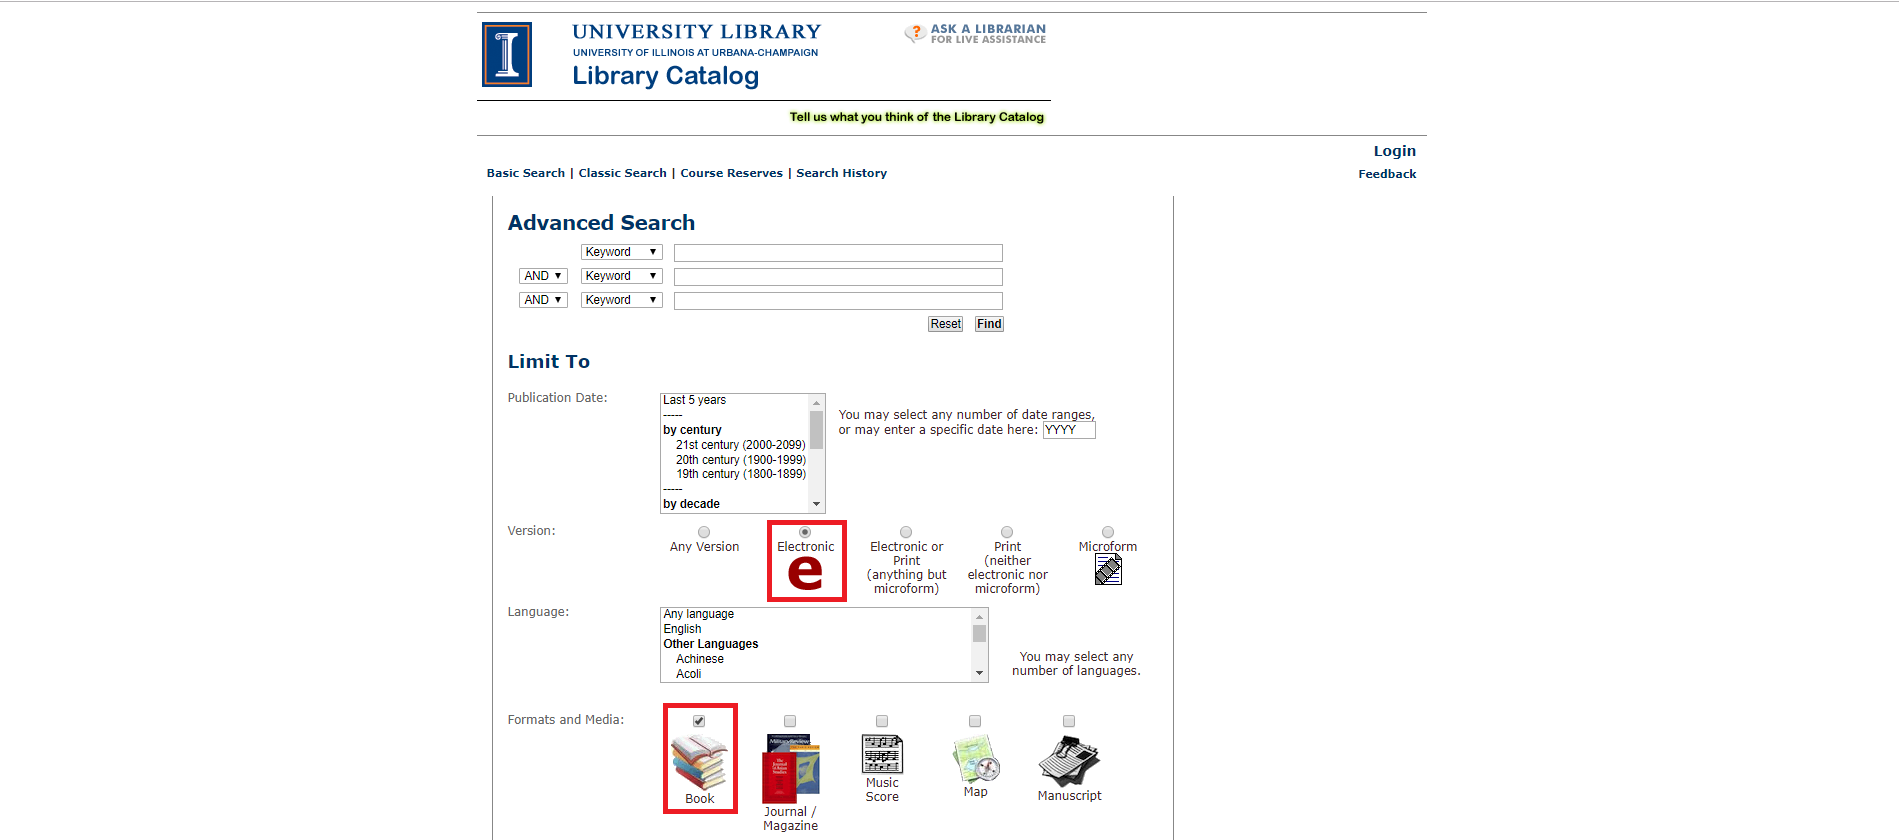 Red rectangles highlight the Electronic and Book options on the Advanced Search page of the Library Catalog